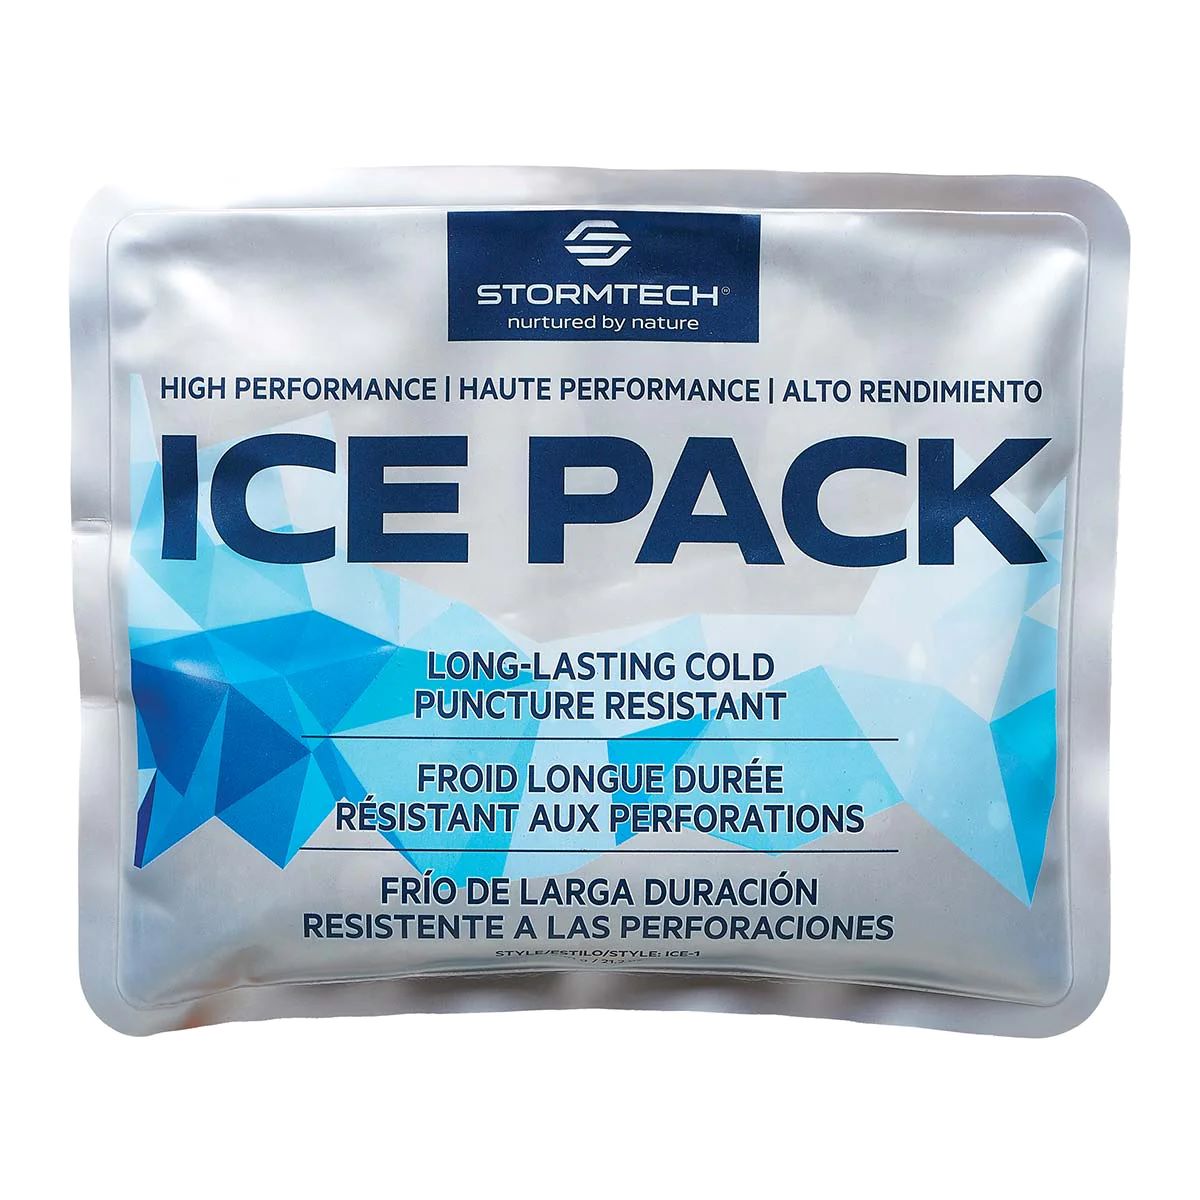 Spend Less with DIY Reusable Ice Packs for Coolers